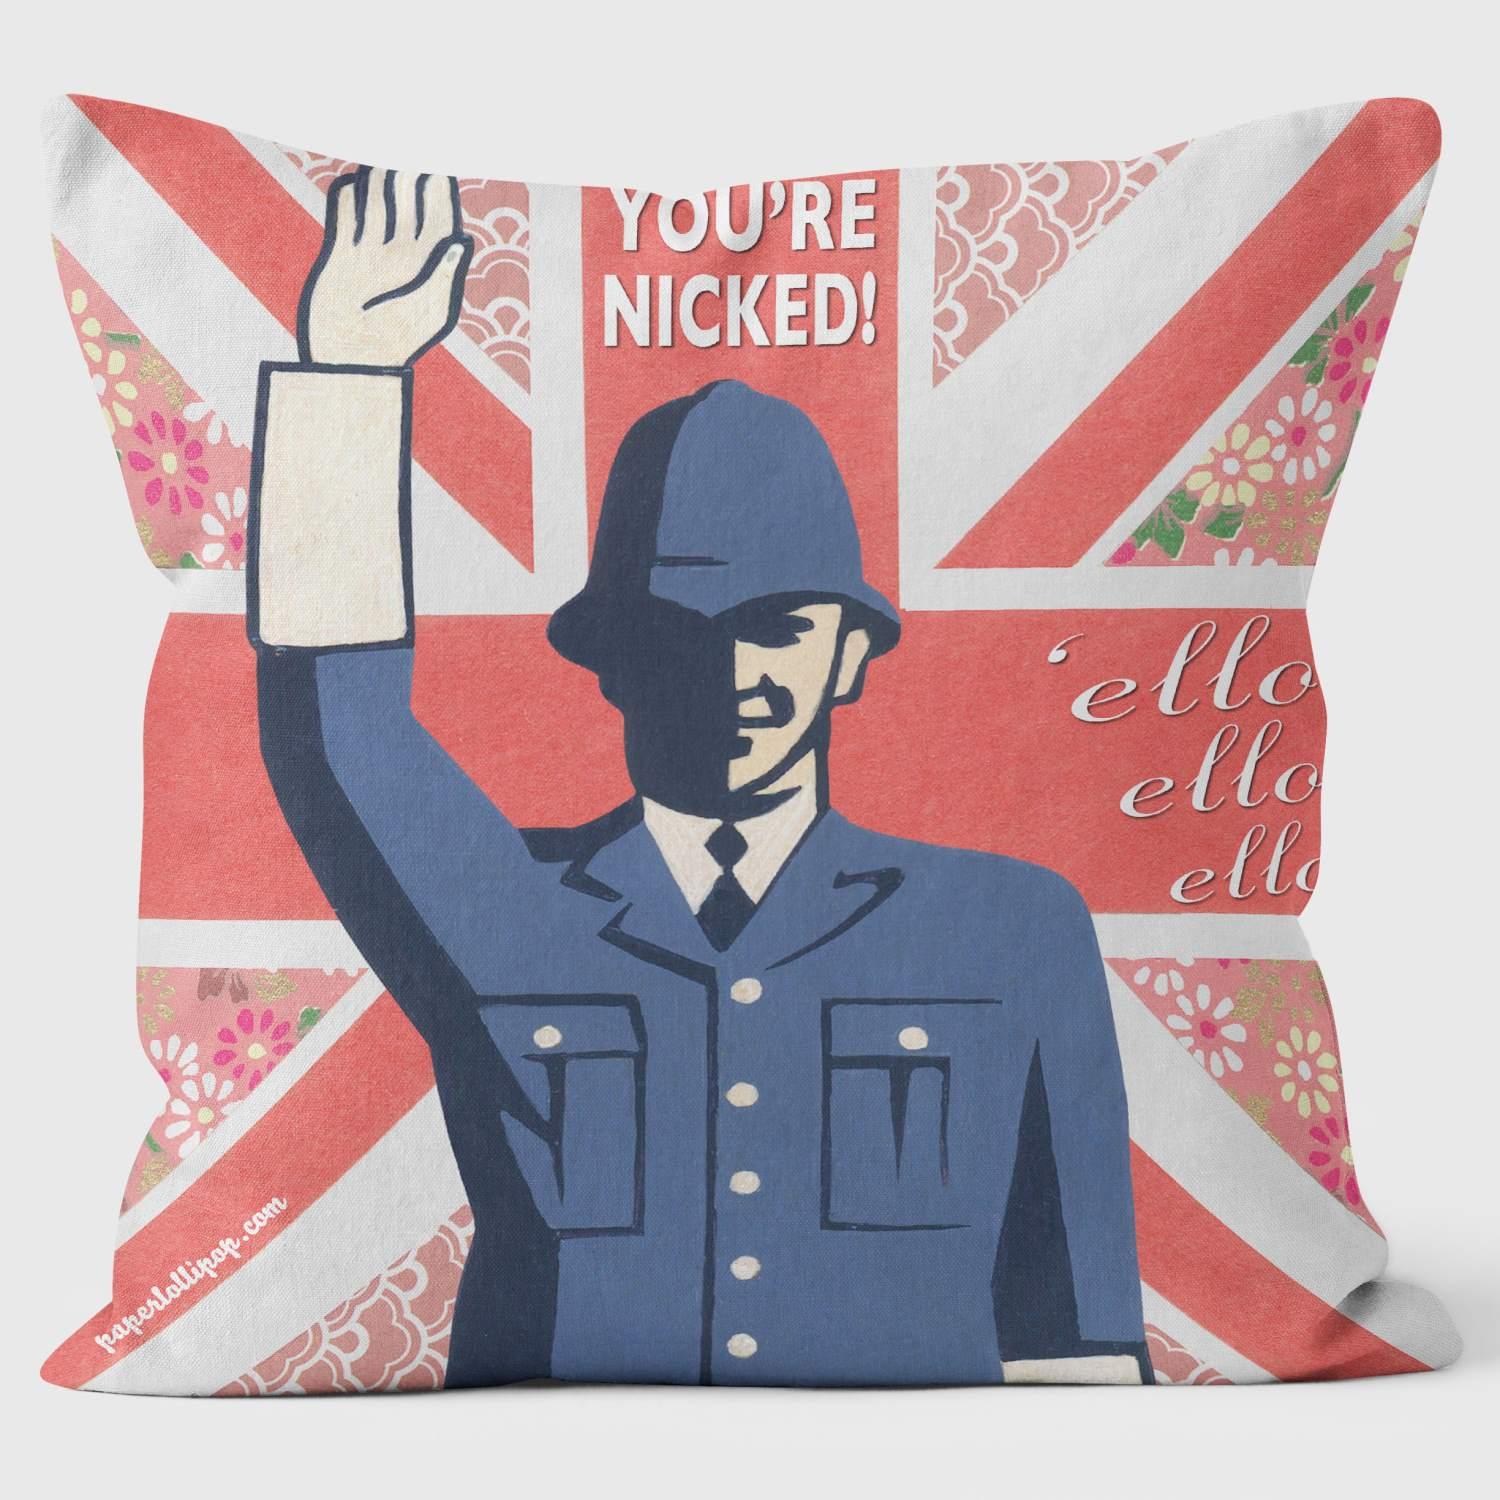 Stop Your Knicked - Paperlollipop Cushion - Handmade Cushions UK - WeLoveCushions